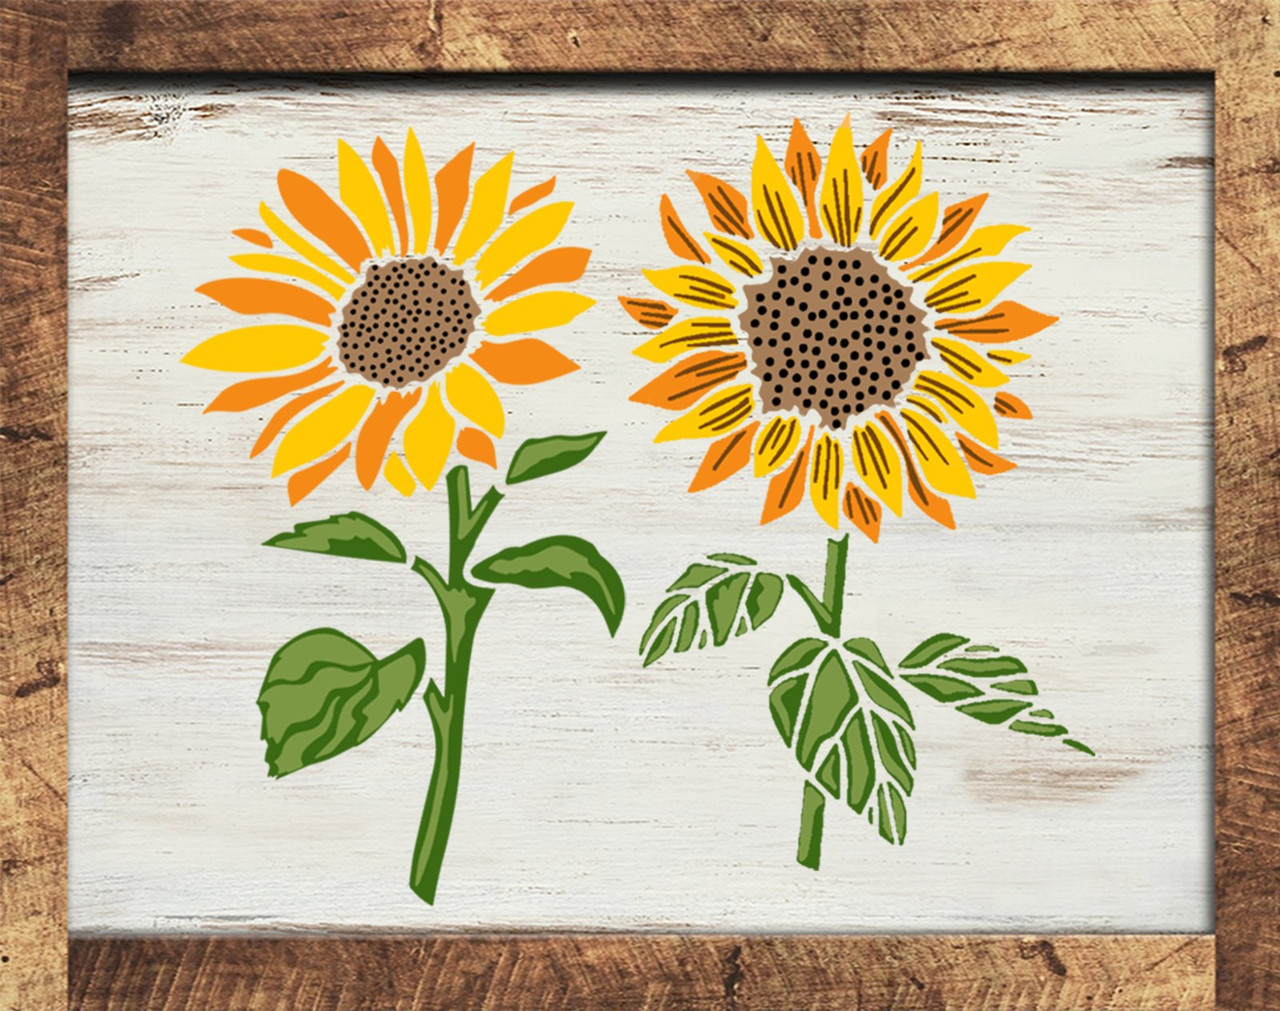 Sunflowers with Stem and Leaves Stencil by StudioR12 | DIY Summer Garden Home Decor | Craft & Paint Wood Sign | Reusable Mylar Template | Select Size